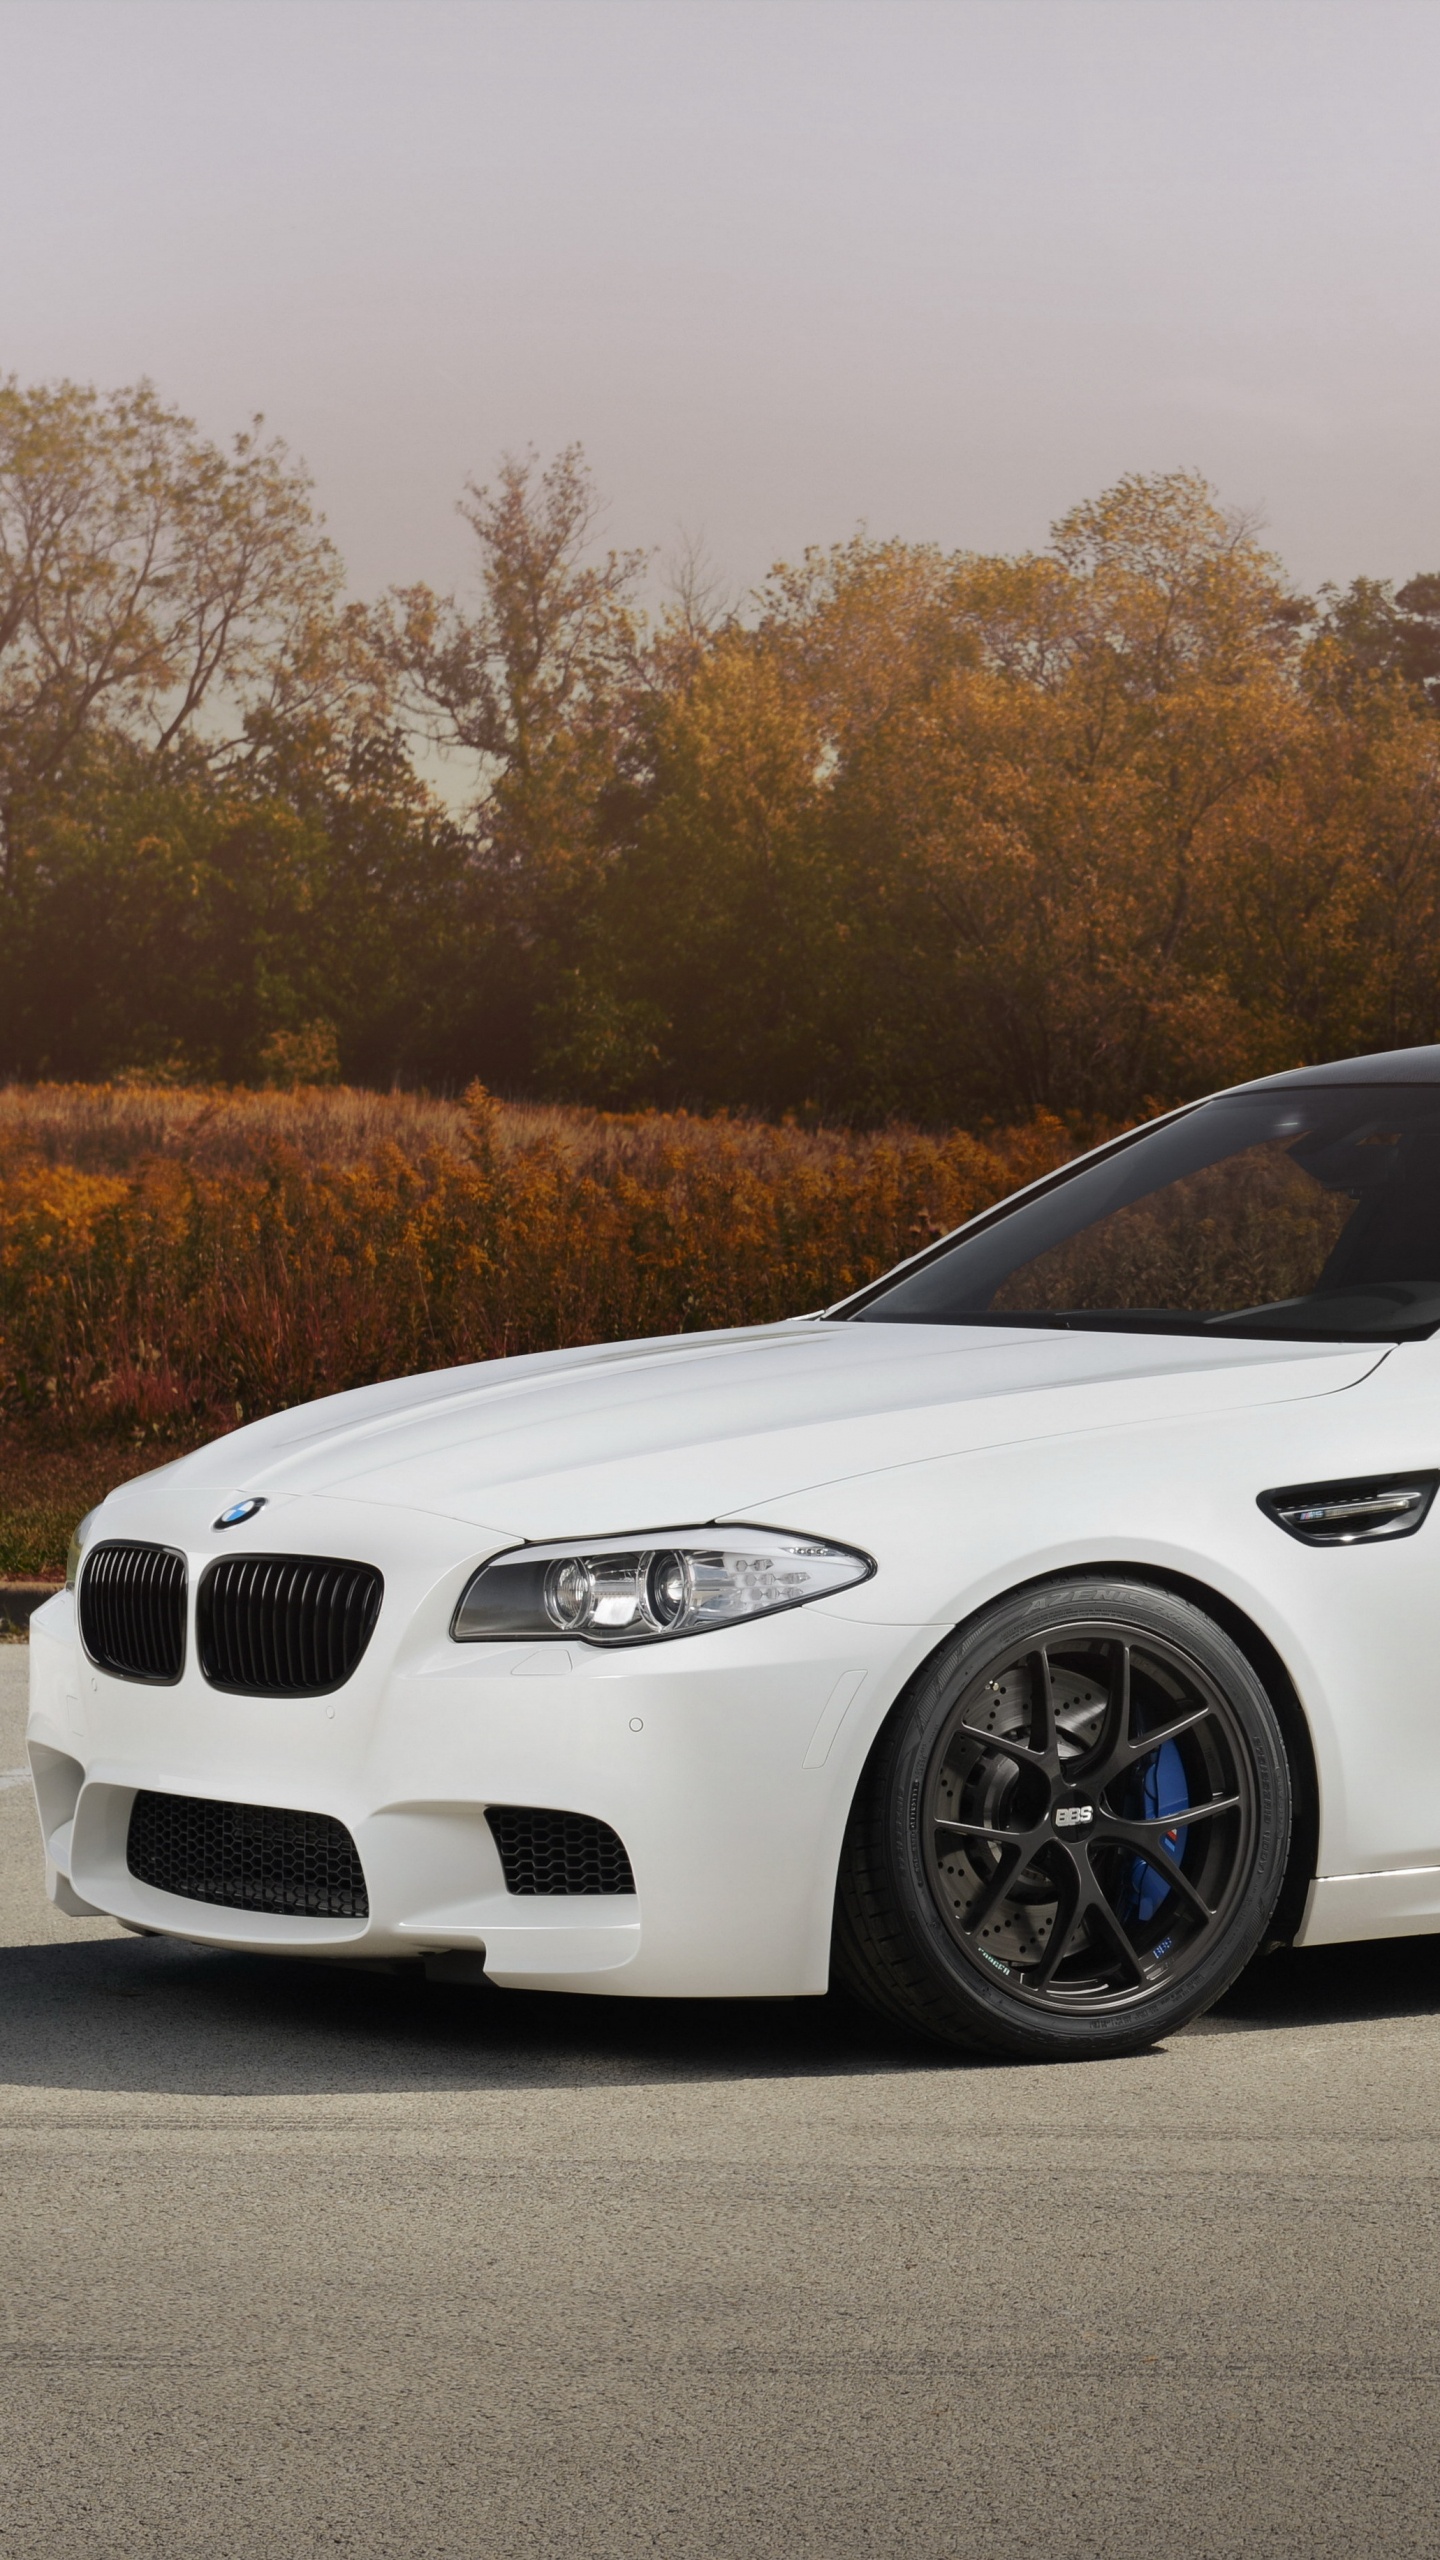 White Bmw m 3 Coupe Parked on Gray Asphalt Road During Daytime. Wallpaper in 1440x2560 Resolution